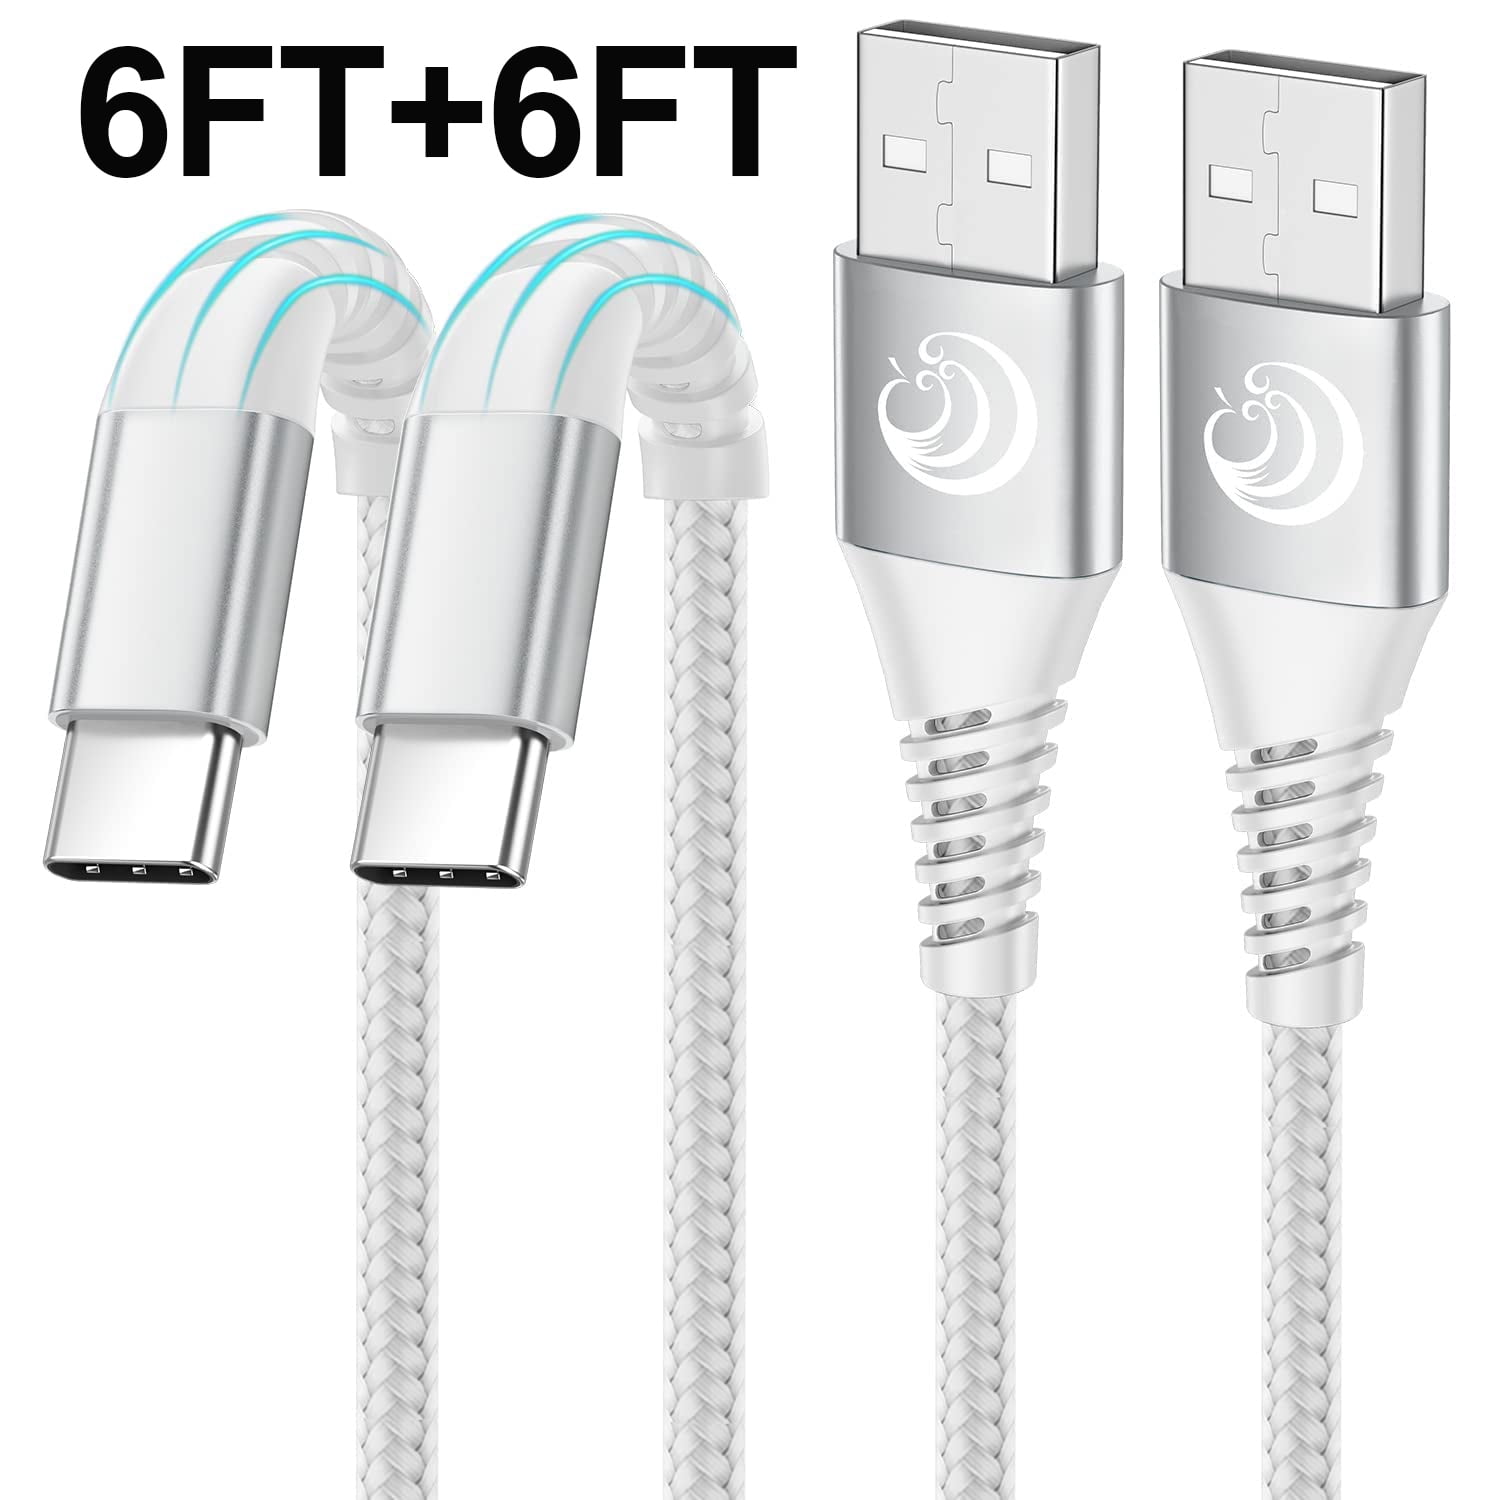 Android Auto Type C Cable, 3FT 6FT 2-Pack USB C Charger Cable Fast Charging